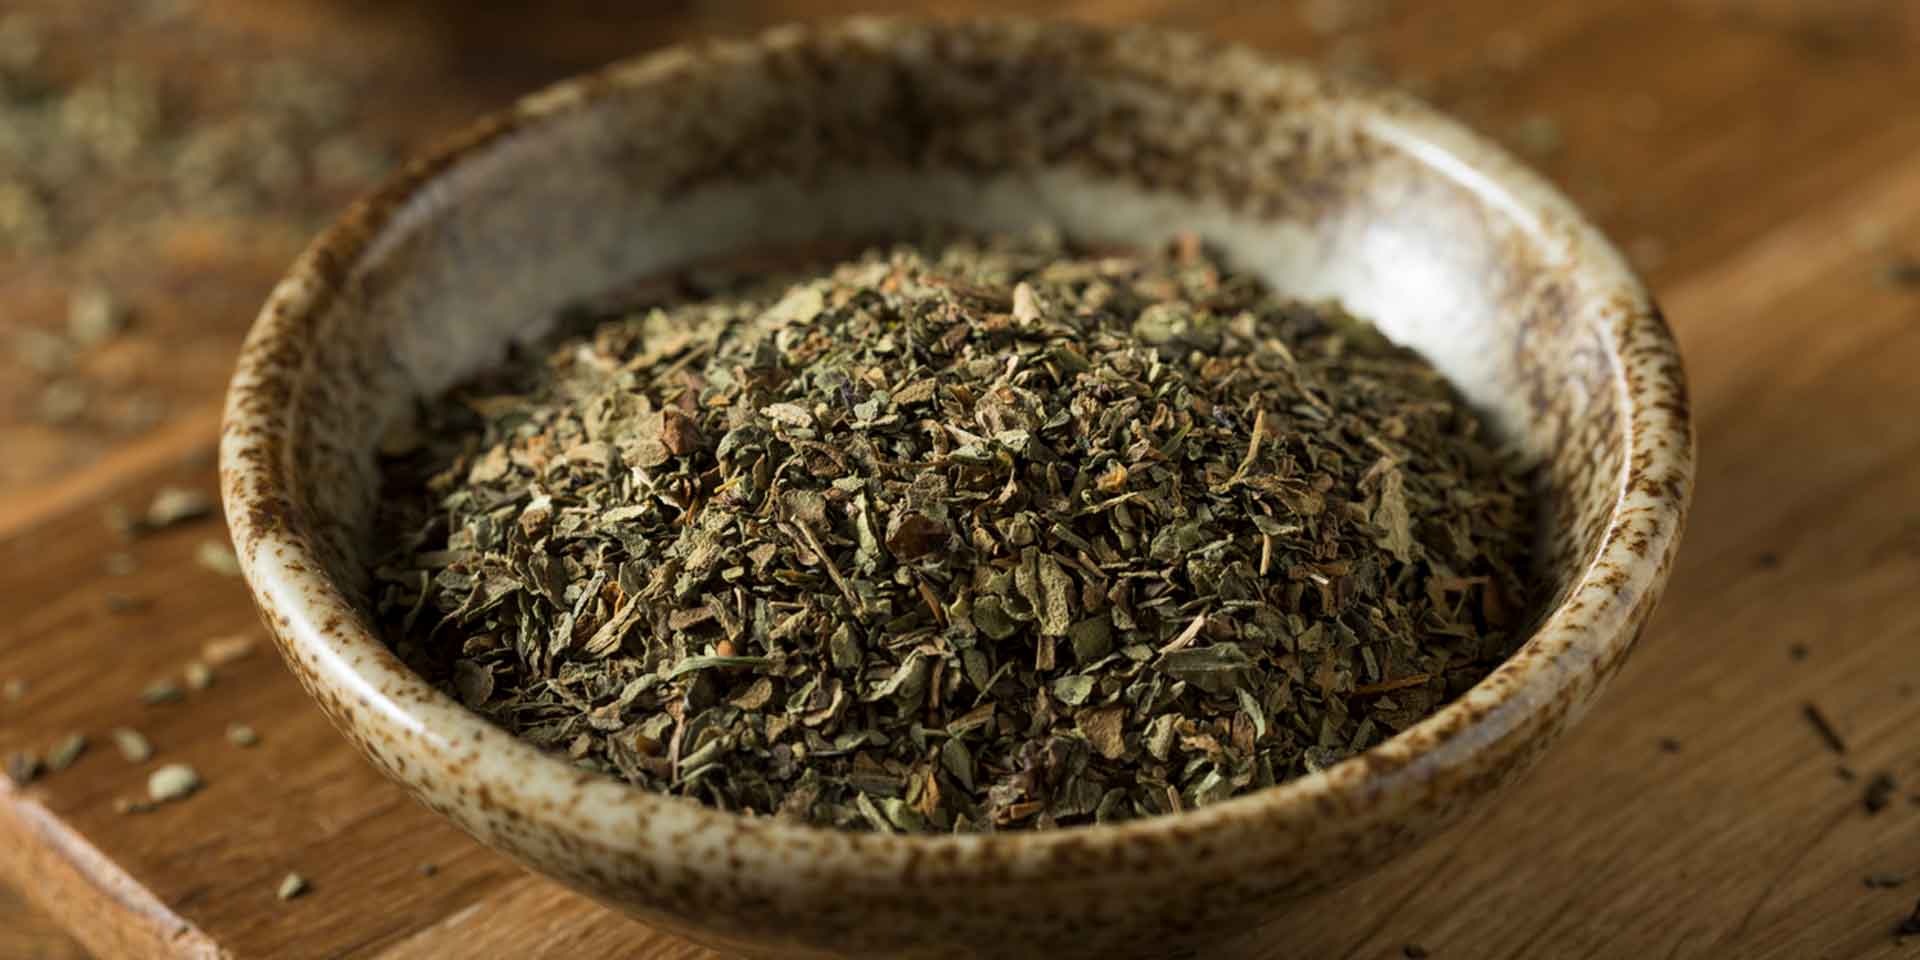 A bowl of dried herbs on a wooden table